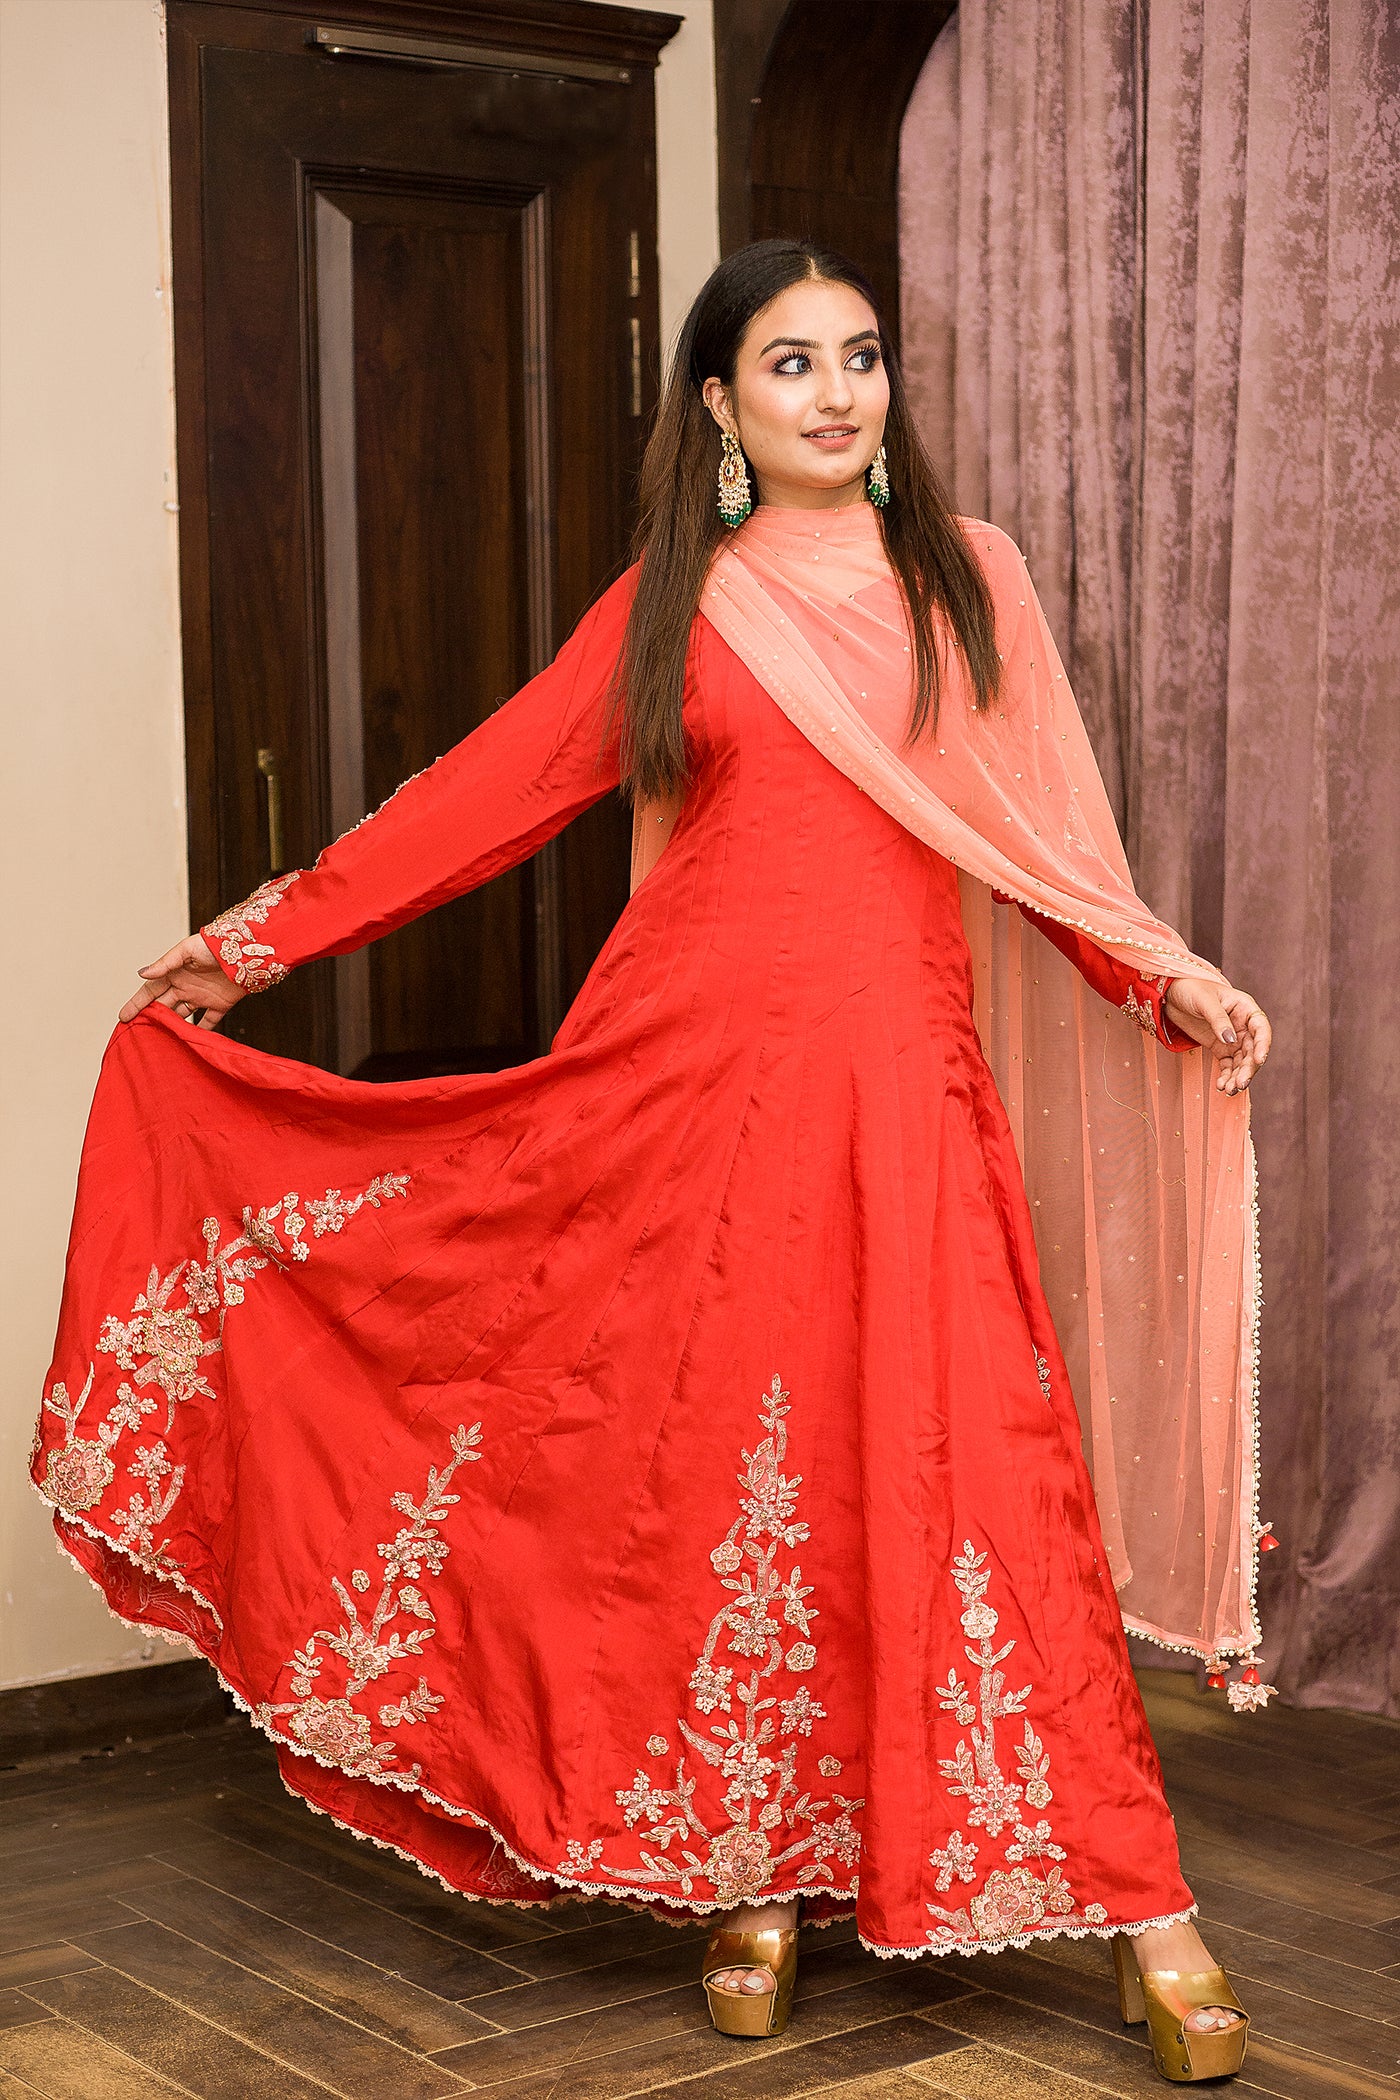 Candy Apple Red Embroidered Anarkali Indian Clothing in Denver, CO, Aurora, CO, Boulder, CO, Fort Collins, CO, Colorado Springs, CO, Parker, CO, Highlands Ranch, CO, Cherry Creek, CO, Centennial, CO, and Longmont, CO. NATIONWIDE SHIPPING USA- India Fashion X